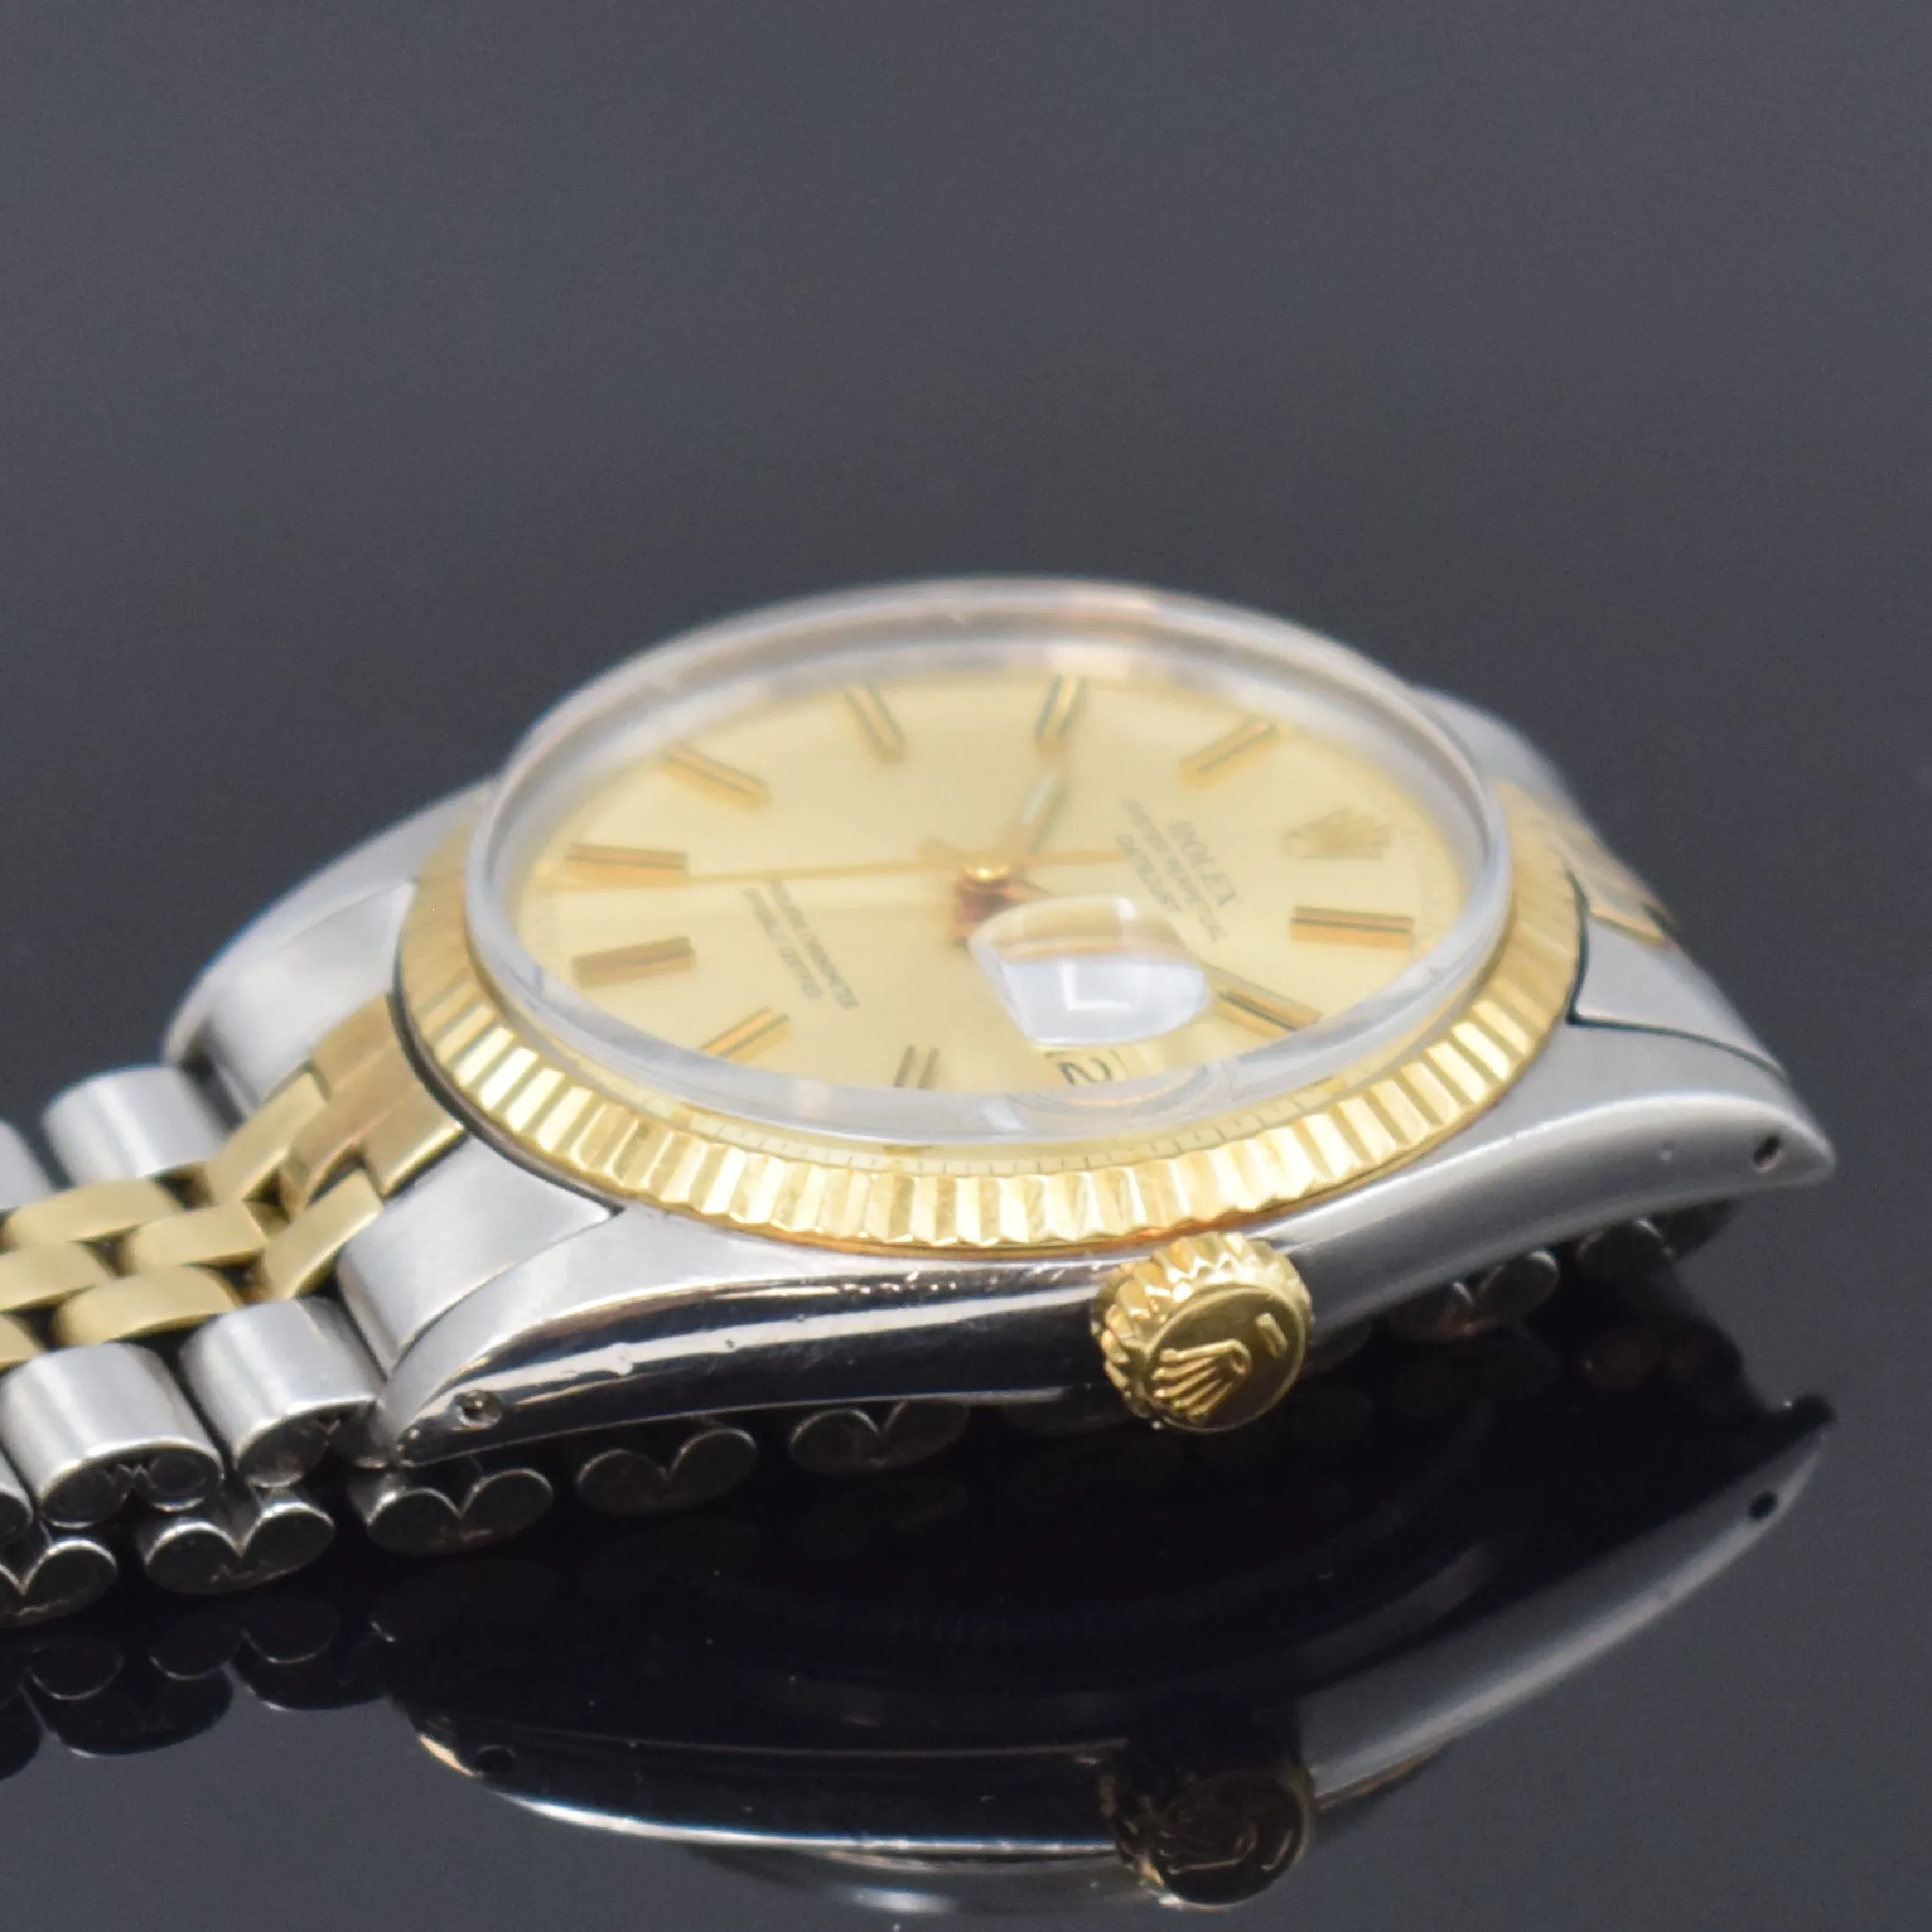 Rolex Datejust 36 1601 36mm Yellow gold and stainless steel Champagne 3